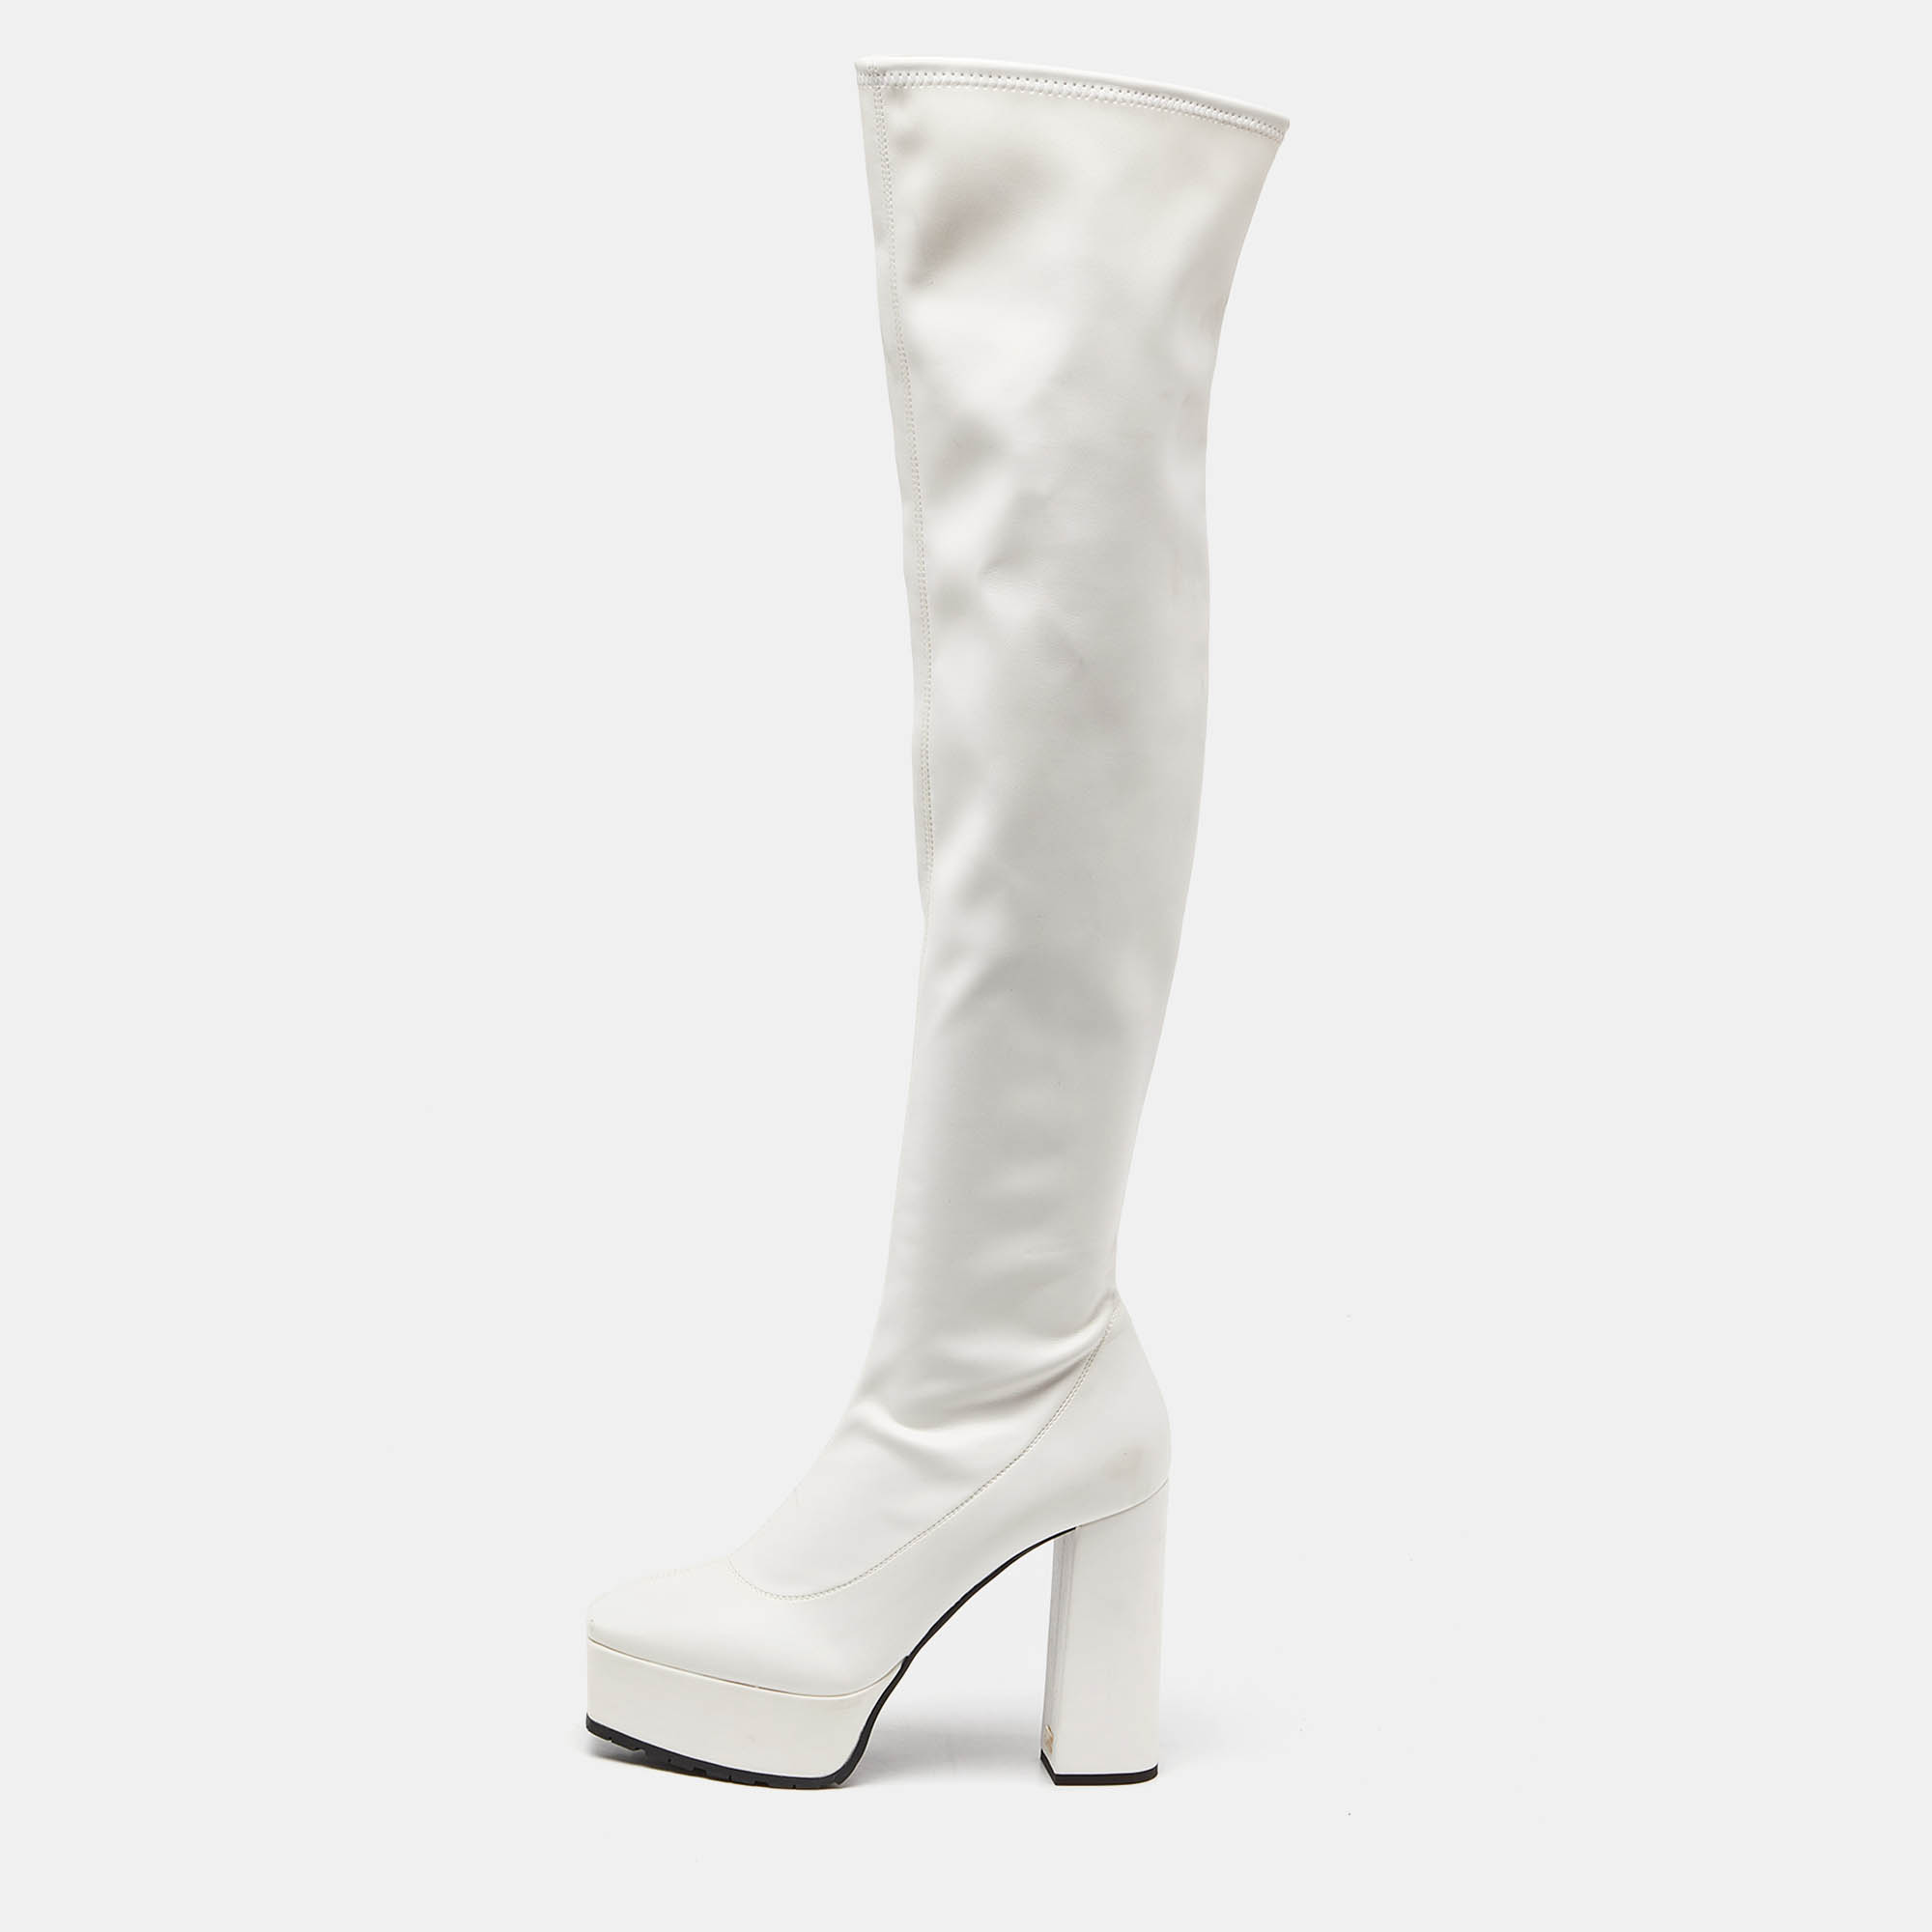 Pre-owned Giuseppe Zanotti White Leather Morgana Over The Knee Length Platform Boots Size 39.5